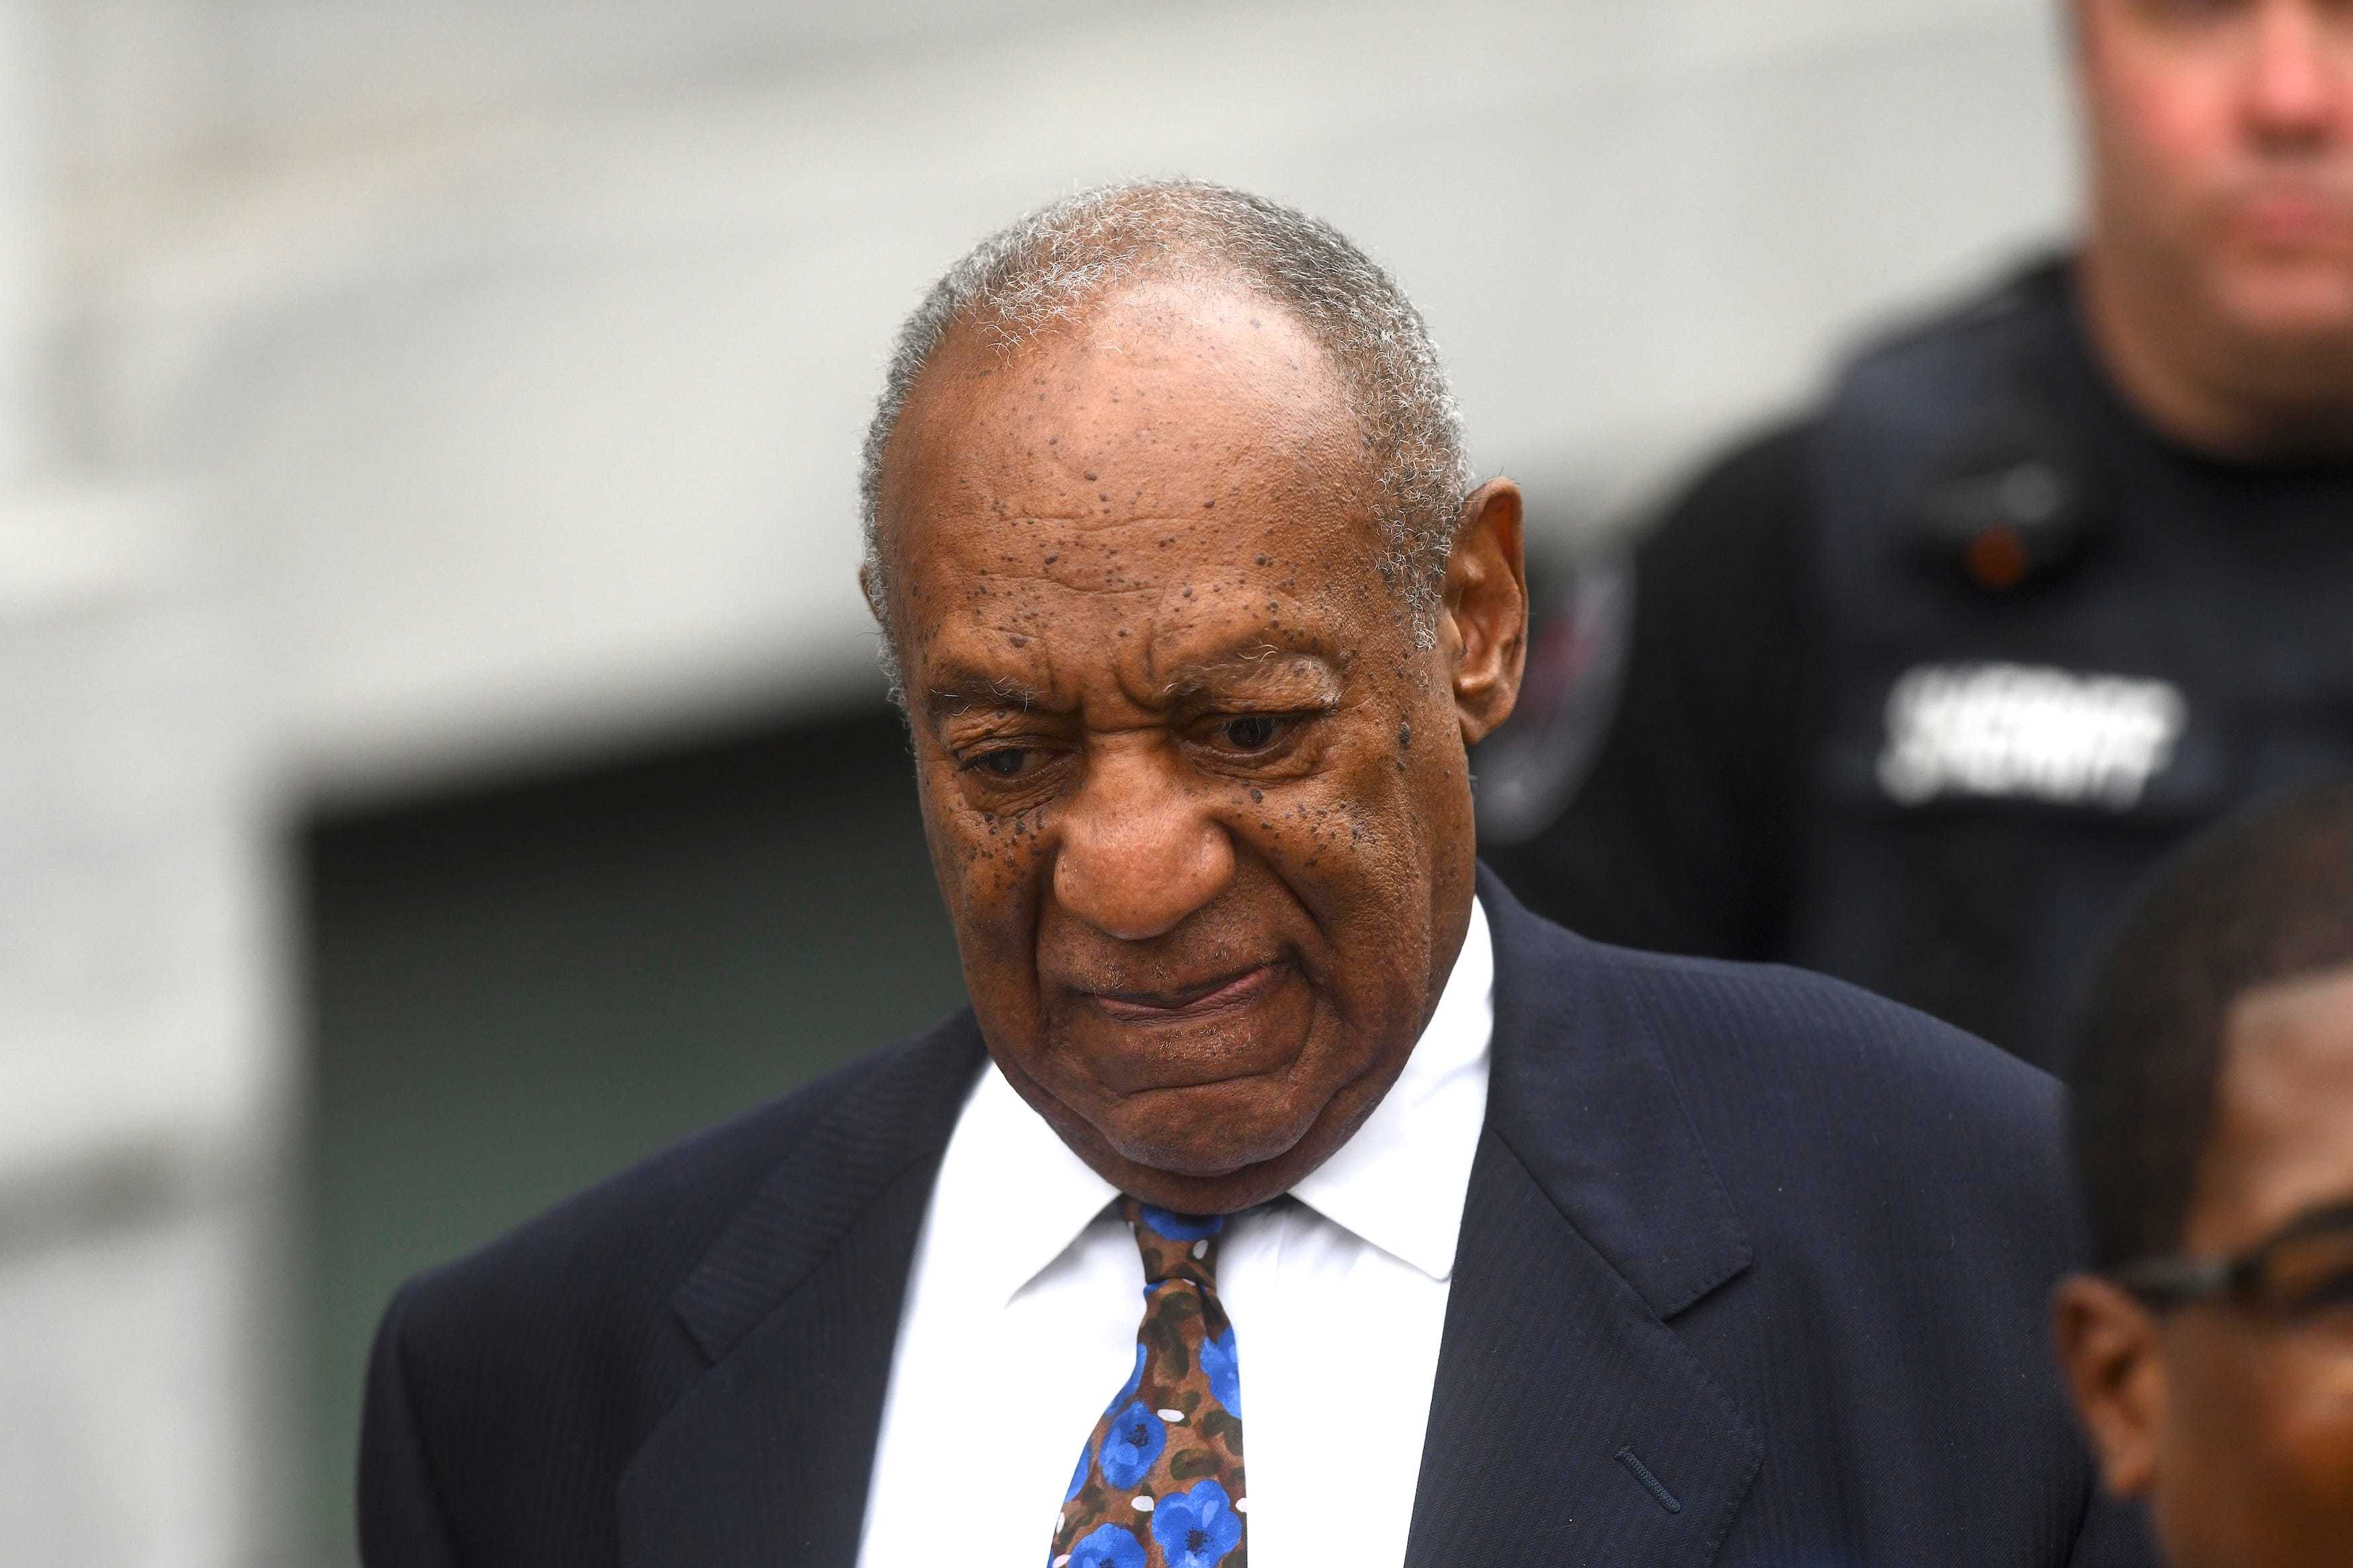 Bill Cosby leaving a courthouse